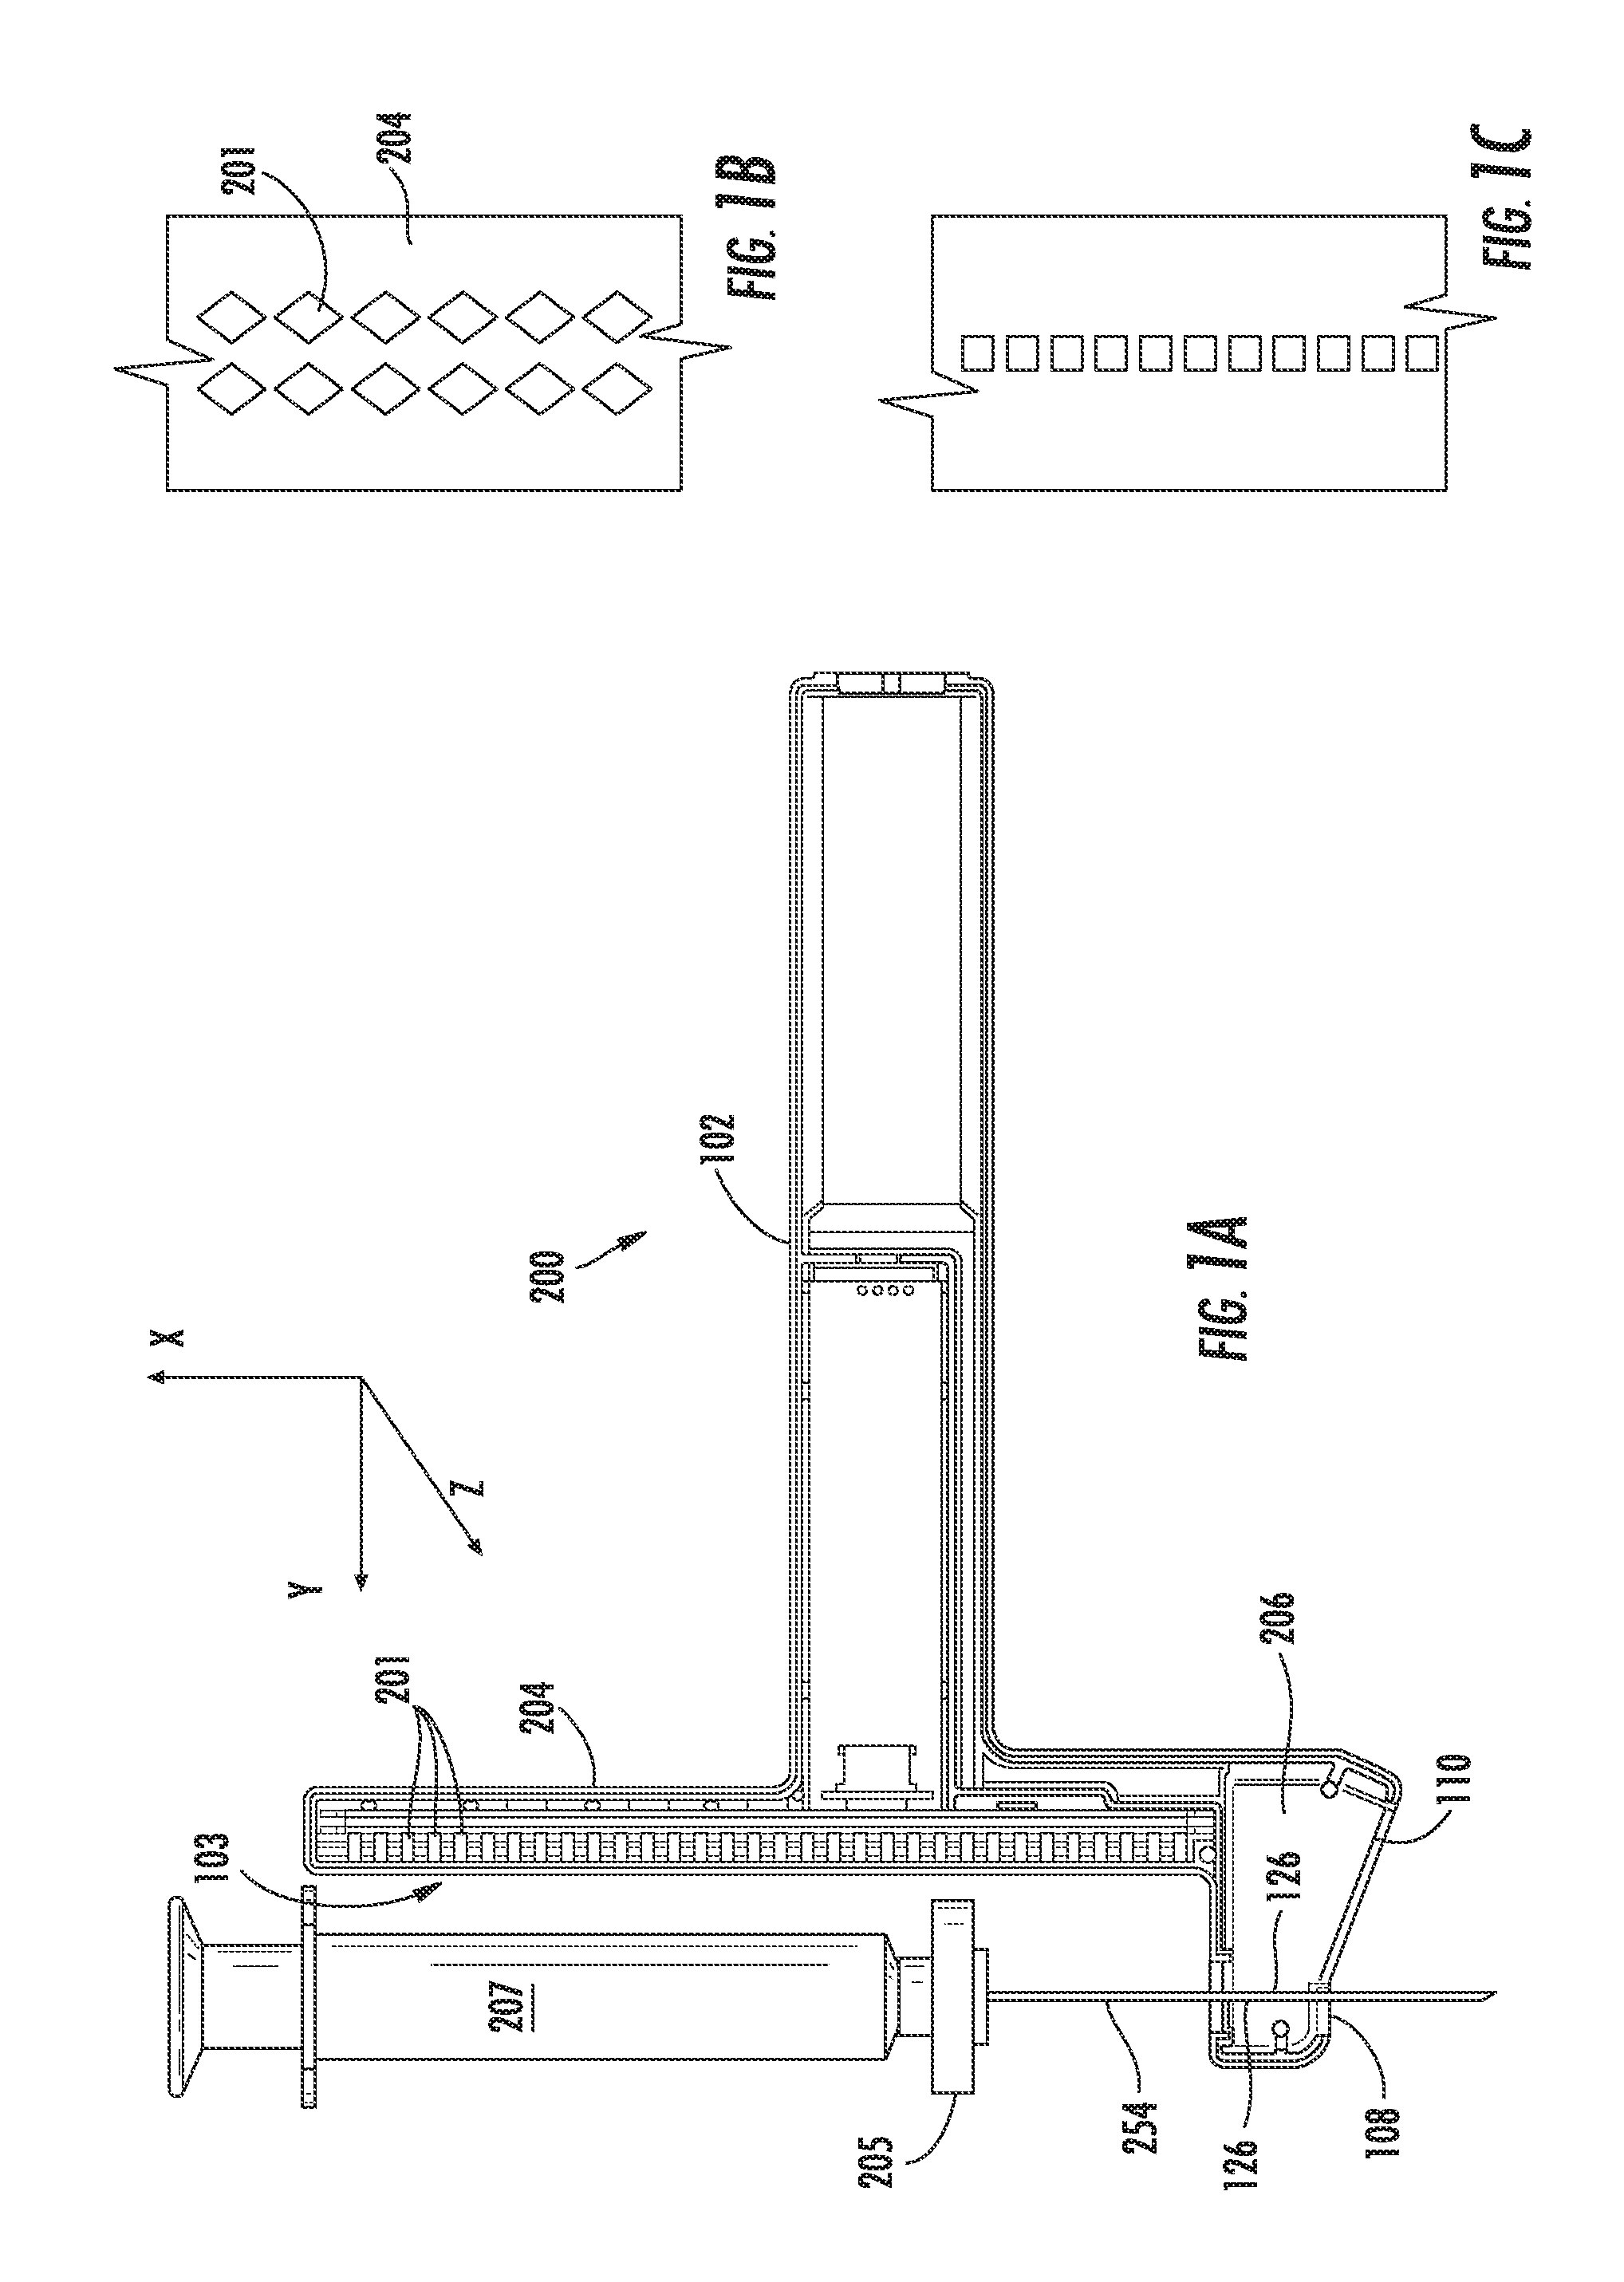 Probe and system for use with an ultrasound device